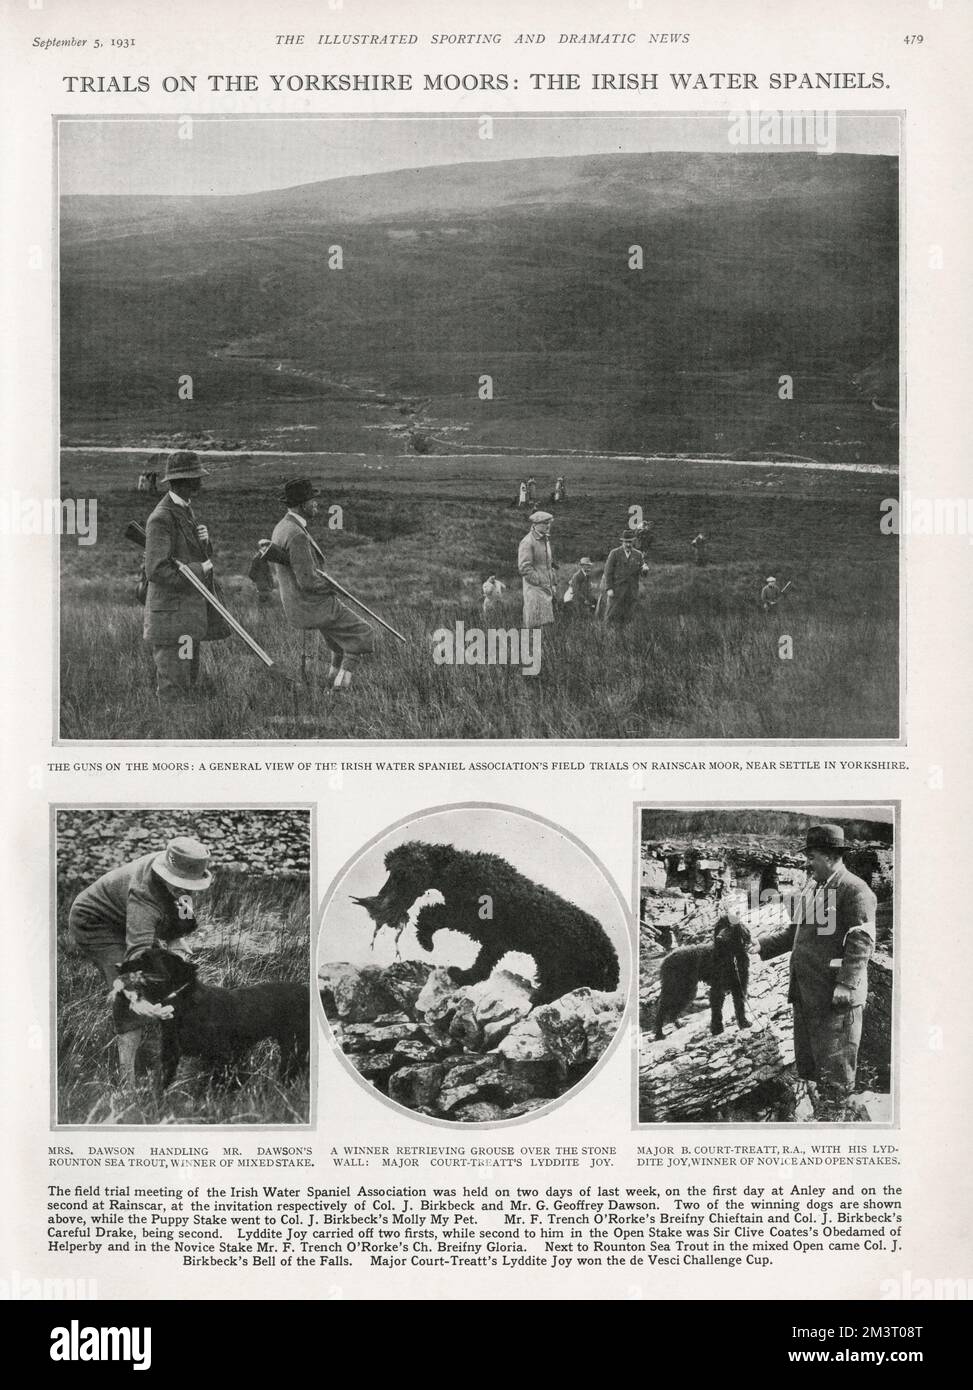 Trials on the Yorkshire Moors: the Irish Water Spaniels. The field trial meeting of the Irish Water Spaniel Association, 1931, was held at Anley and Rainscar at the invitation of Col. J. Birkbeck and Mr G. Geoffrey Dawson. Top image shows the guns on the moors: a general view of the Irish Water Spaniel Association's field trials on Rainscar Moor, near Settle in Yorkshire. Dog winners shown: Rounton Sea Trout and Lyddite Joy owned by Major B. Court-Treatt.  1931 Stock Photo